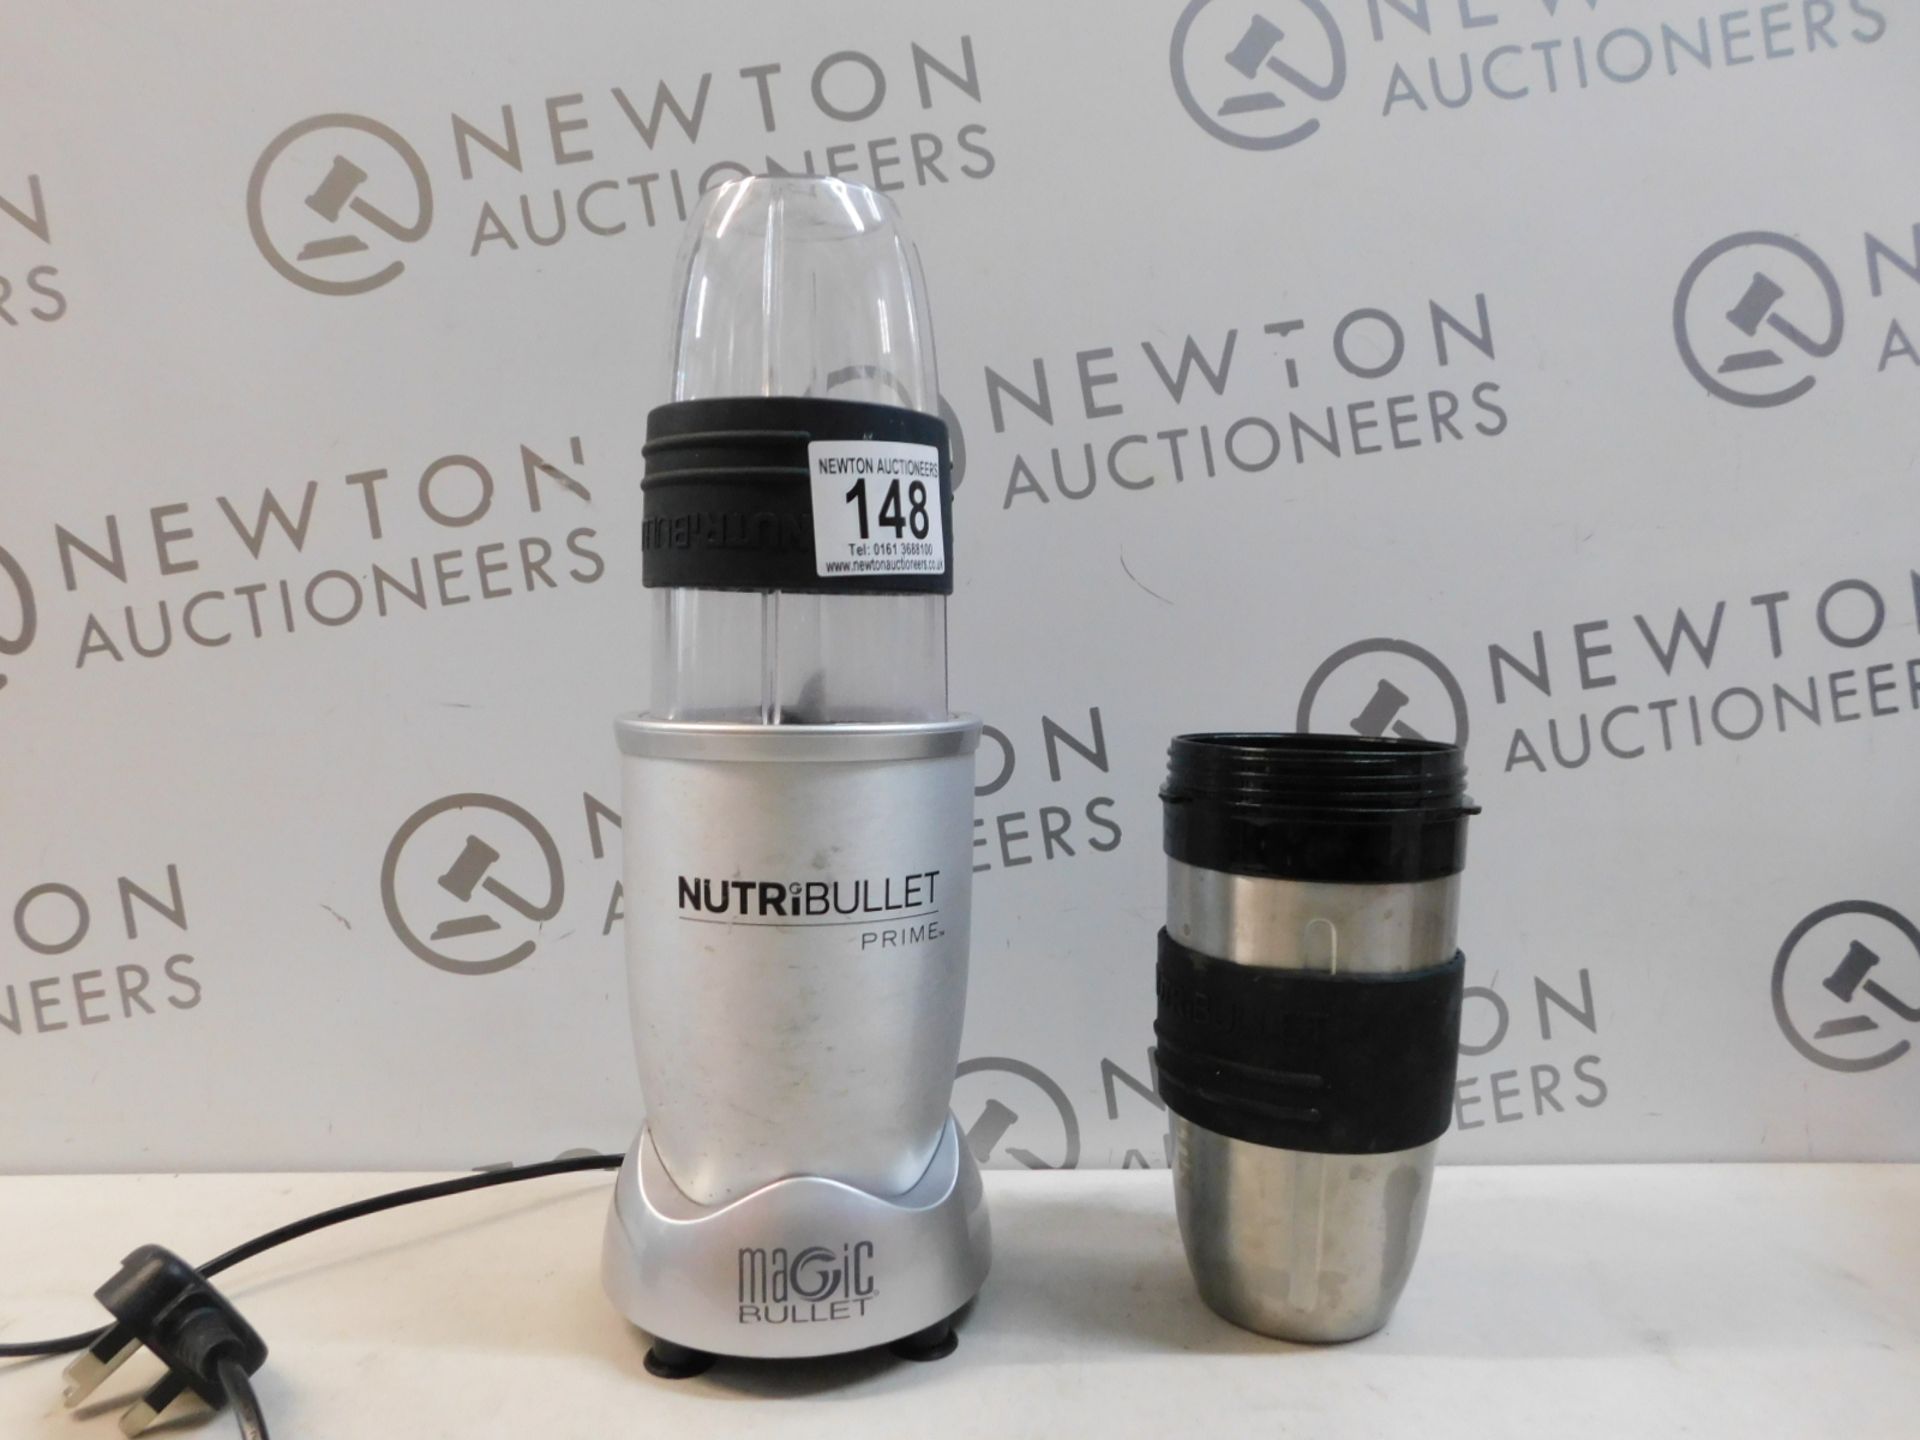 1 NUTRIBULLET PRIME BLENDER/ MIXER WITH ACCESSORIES RRP Â£119.99